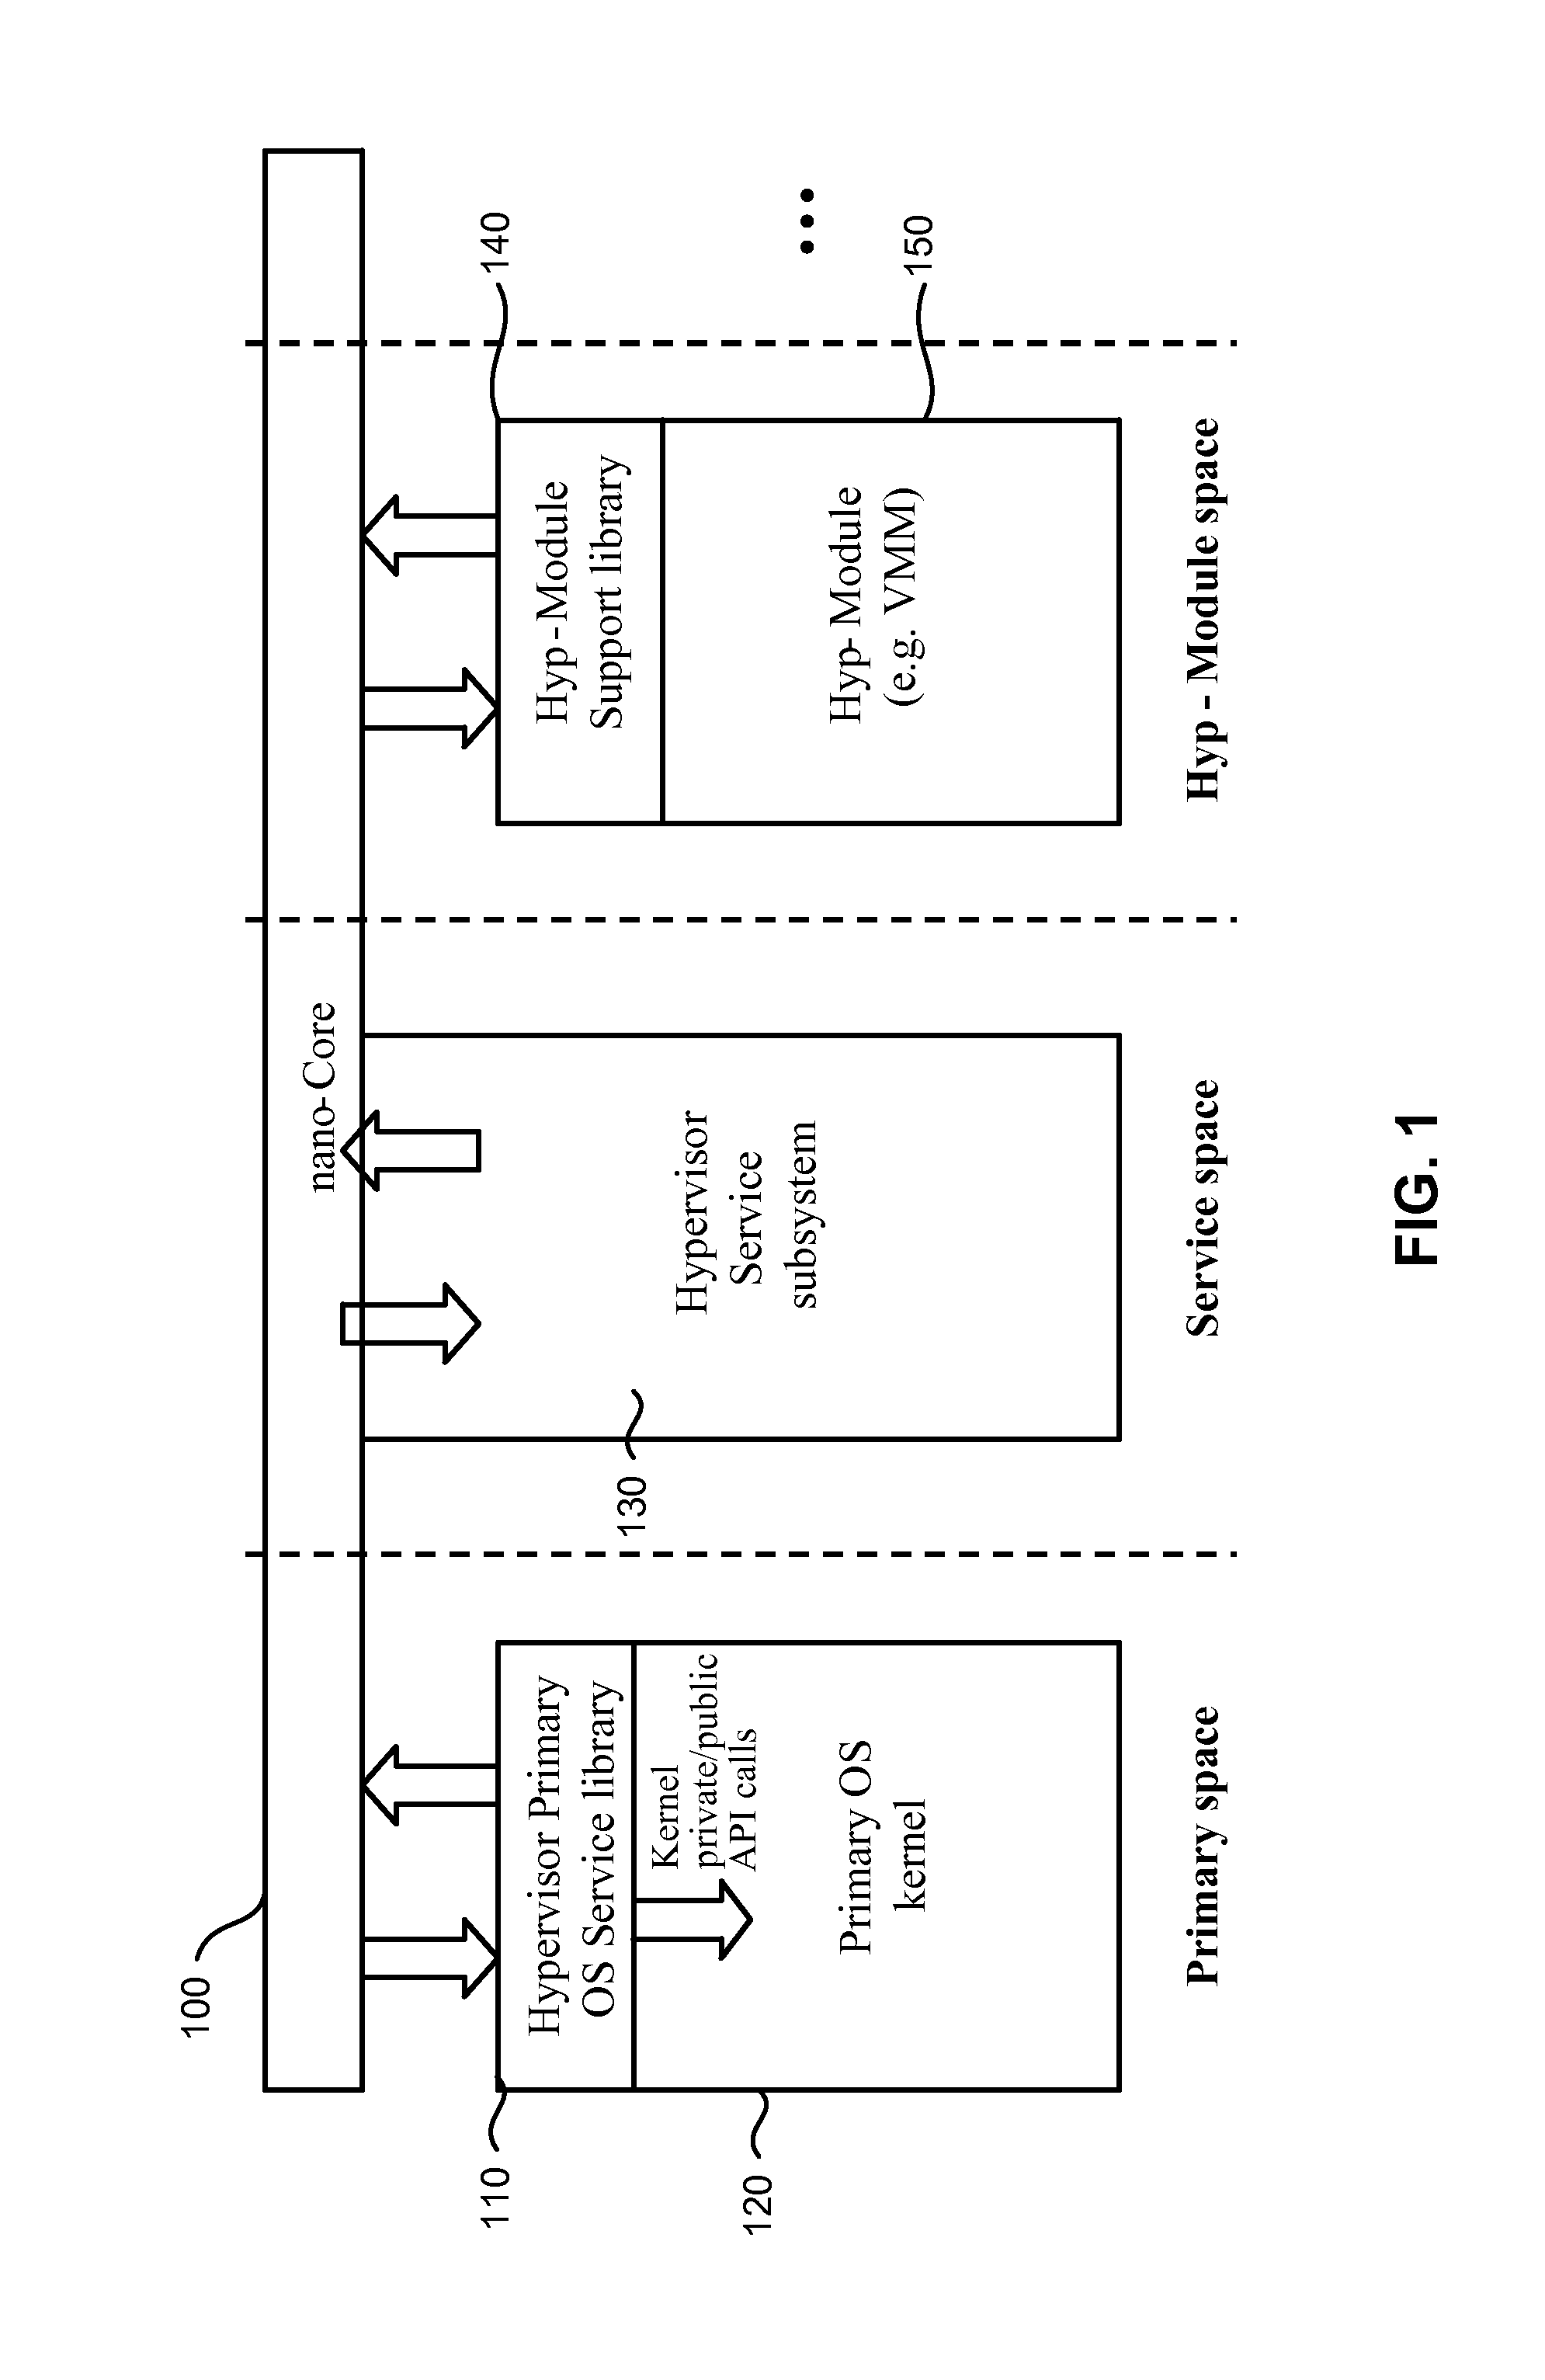 System and method for virtualization using an open bus hypervisor